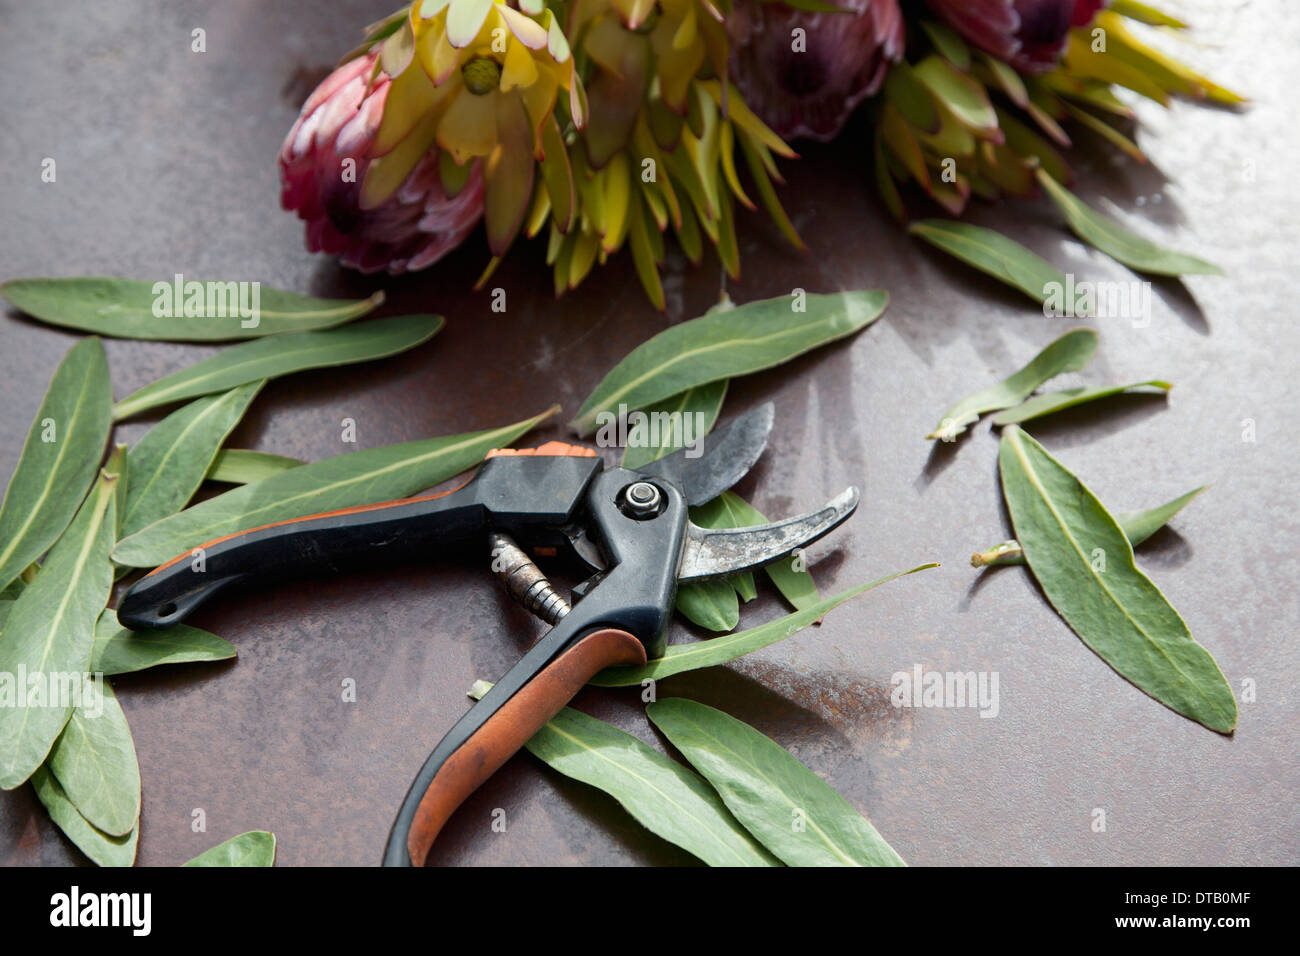 Secateurs and leaf, close-up Stock Photo